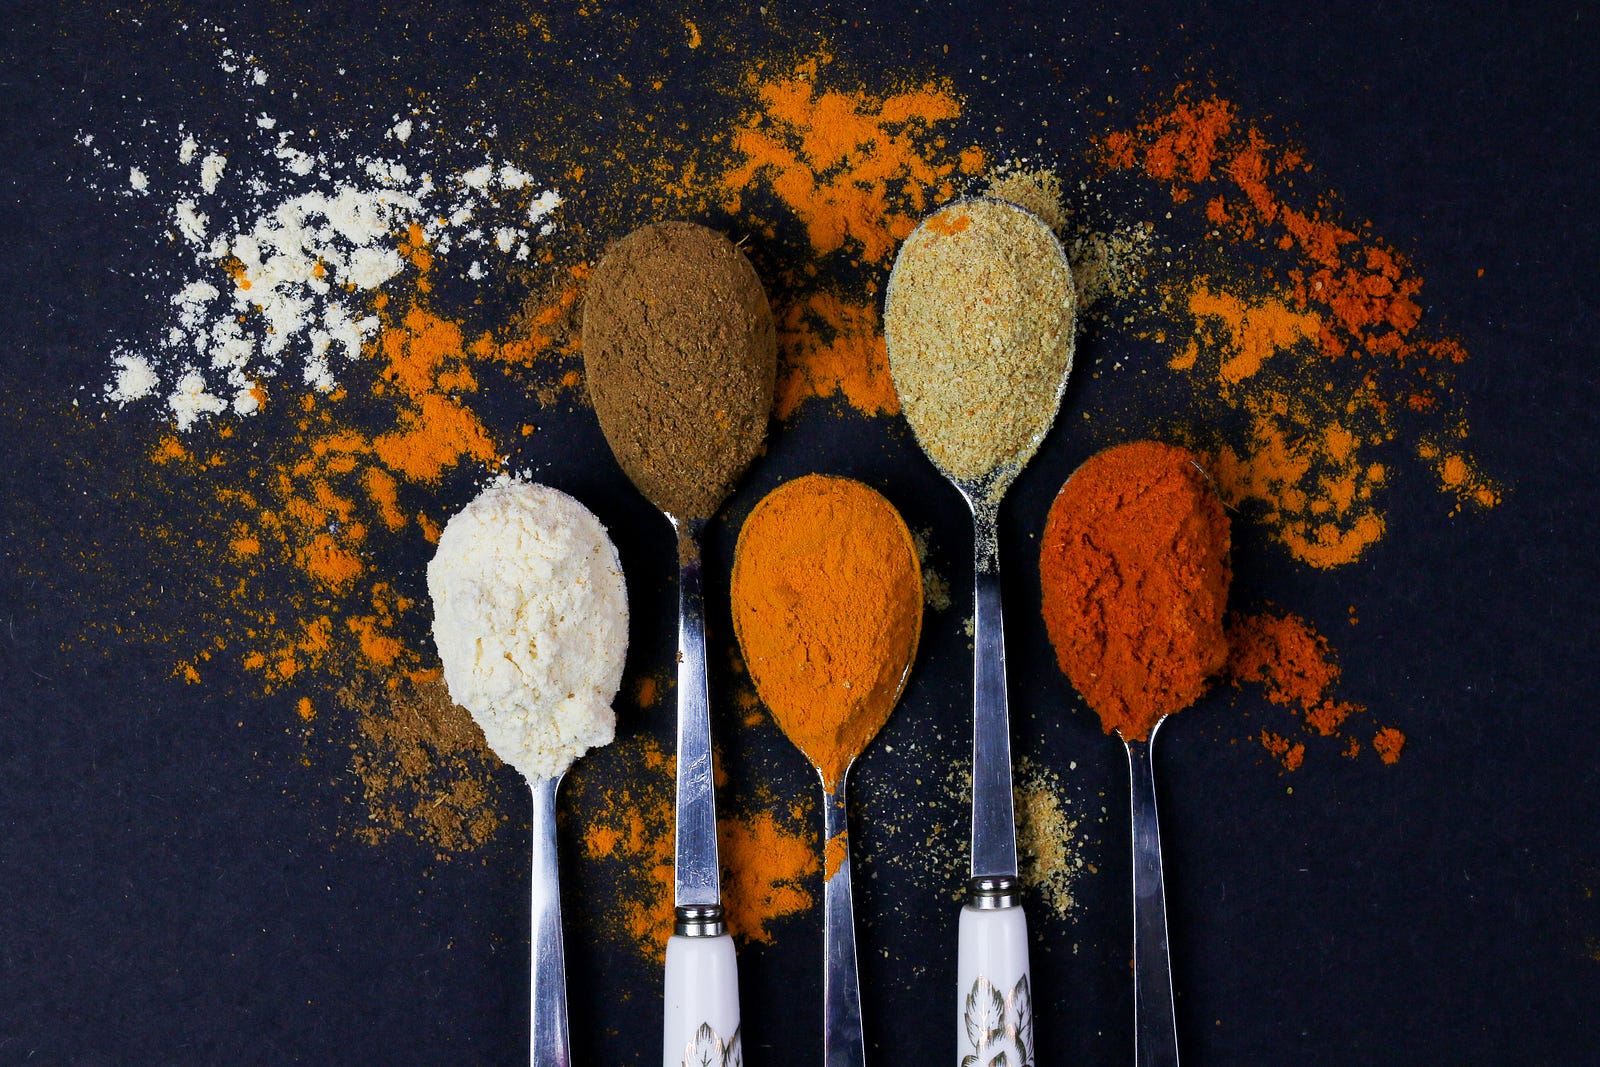 Five spoons emerge from the image bottom, with the utensils chock full of spices (colored white, brown, orange, teal, and deep red from left to right). The spices spill onto the background. Black background. Using spices can help avoid too much-added salt in our food.